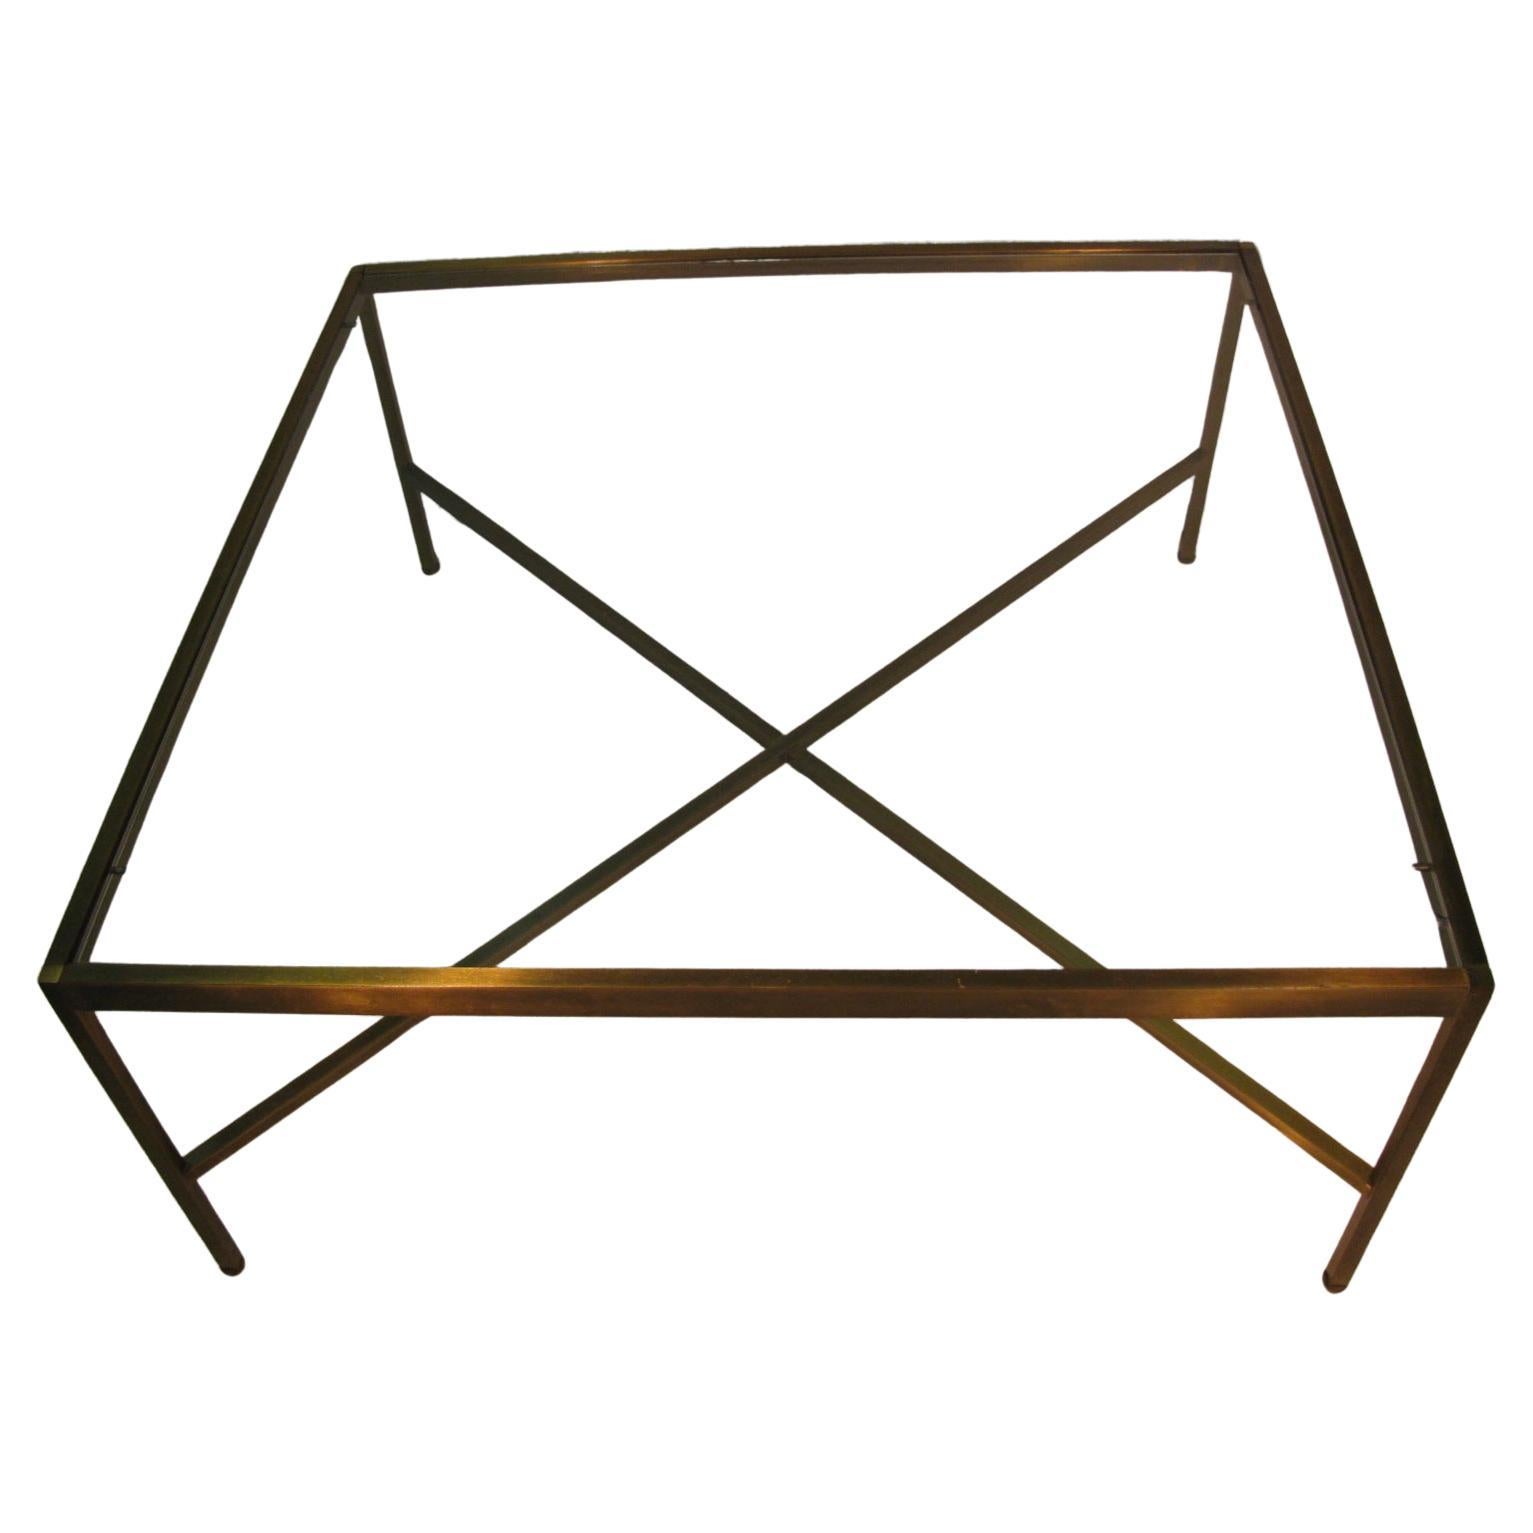 20th Century Mid-Century Modern Brass With Glass Square Cocktail Table with X Stretcher For Sale